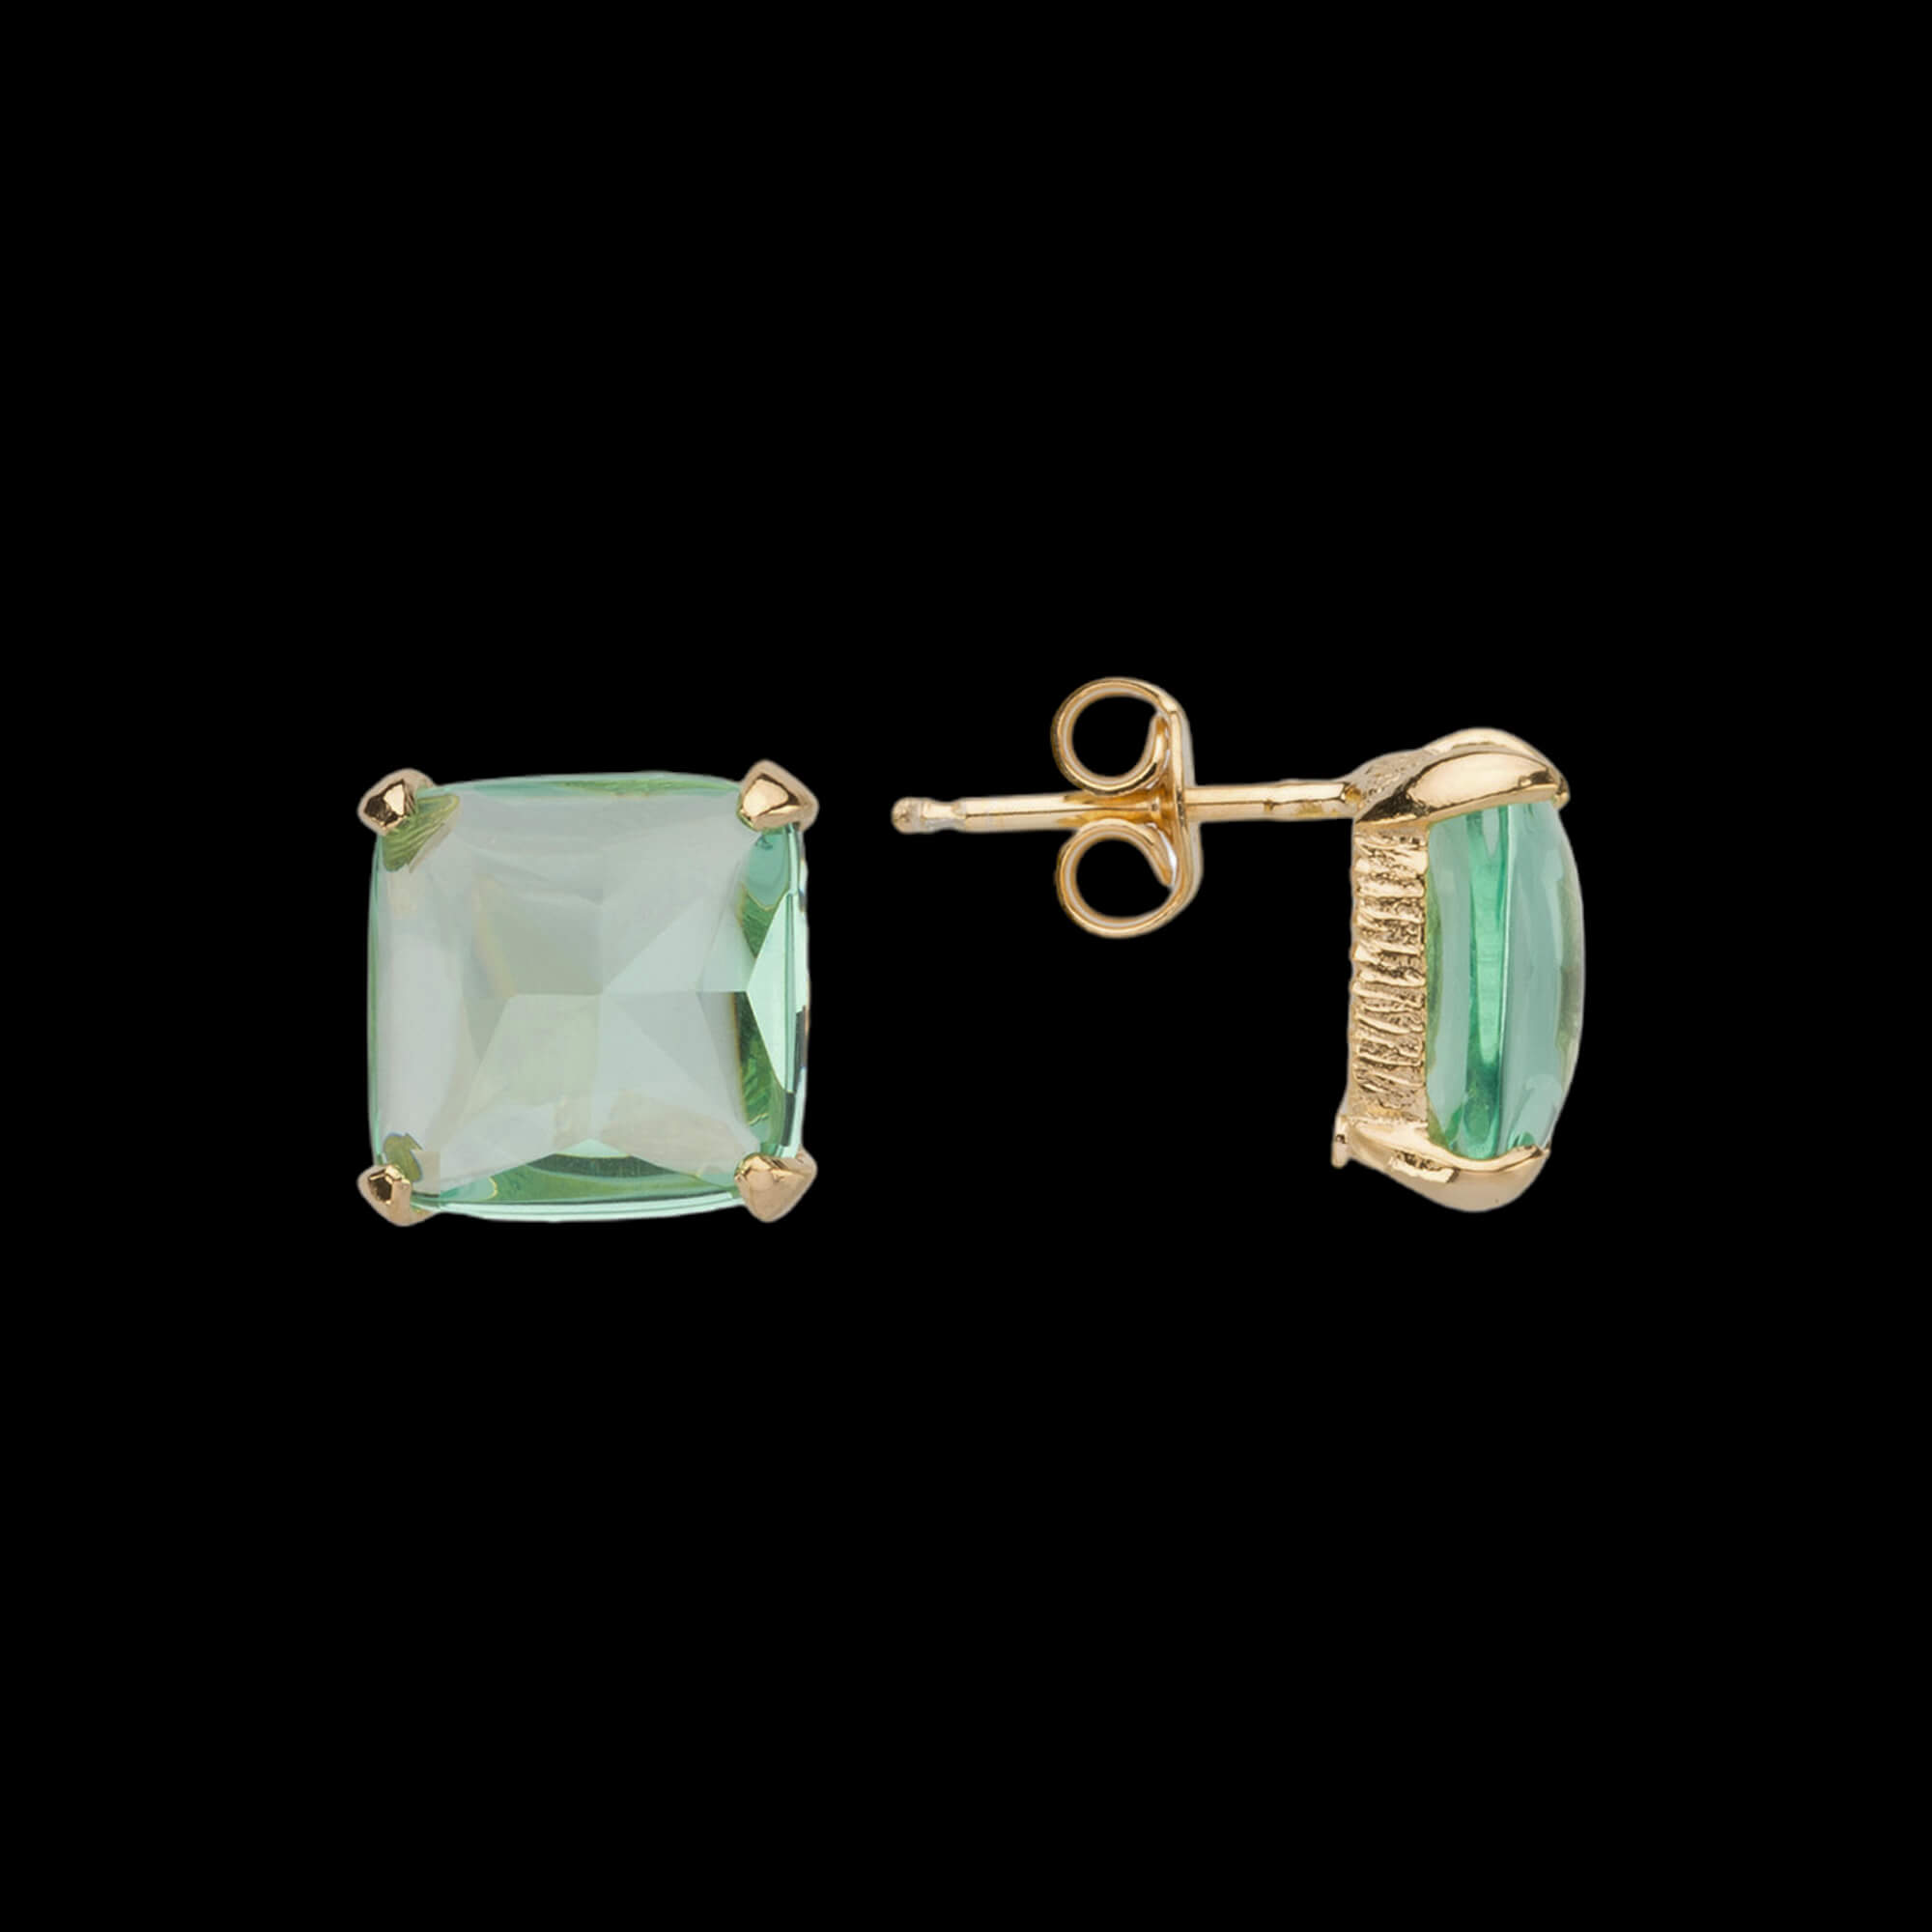 Green and gilt fourth -shaped earrings